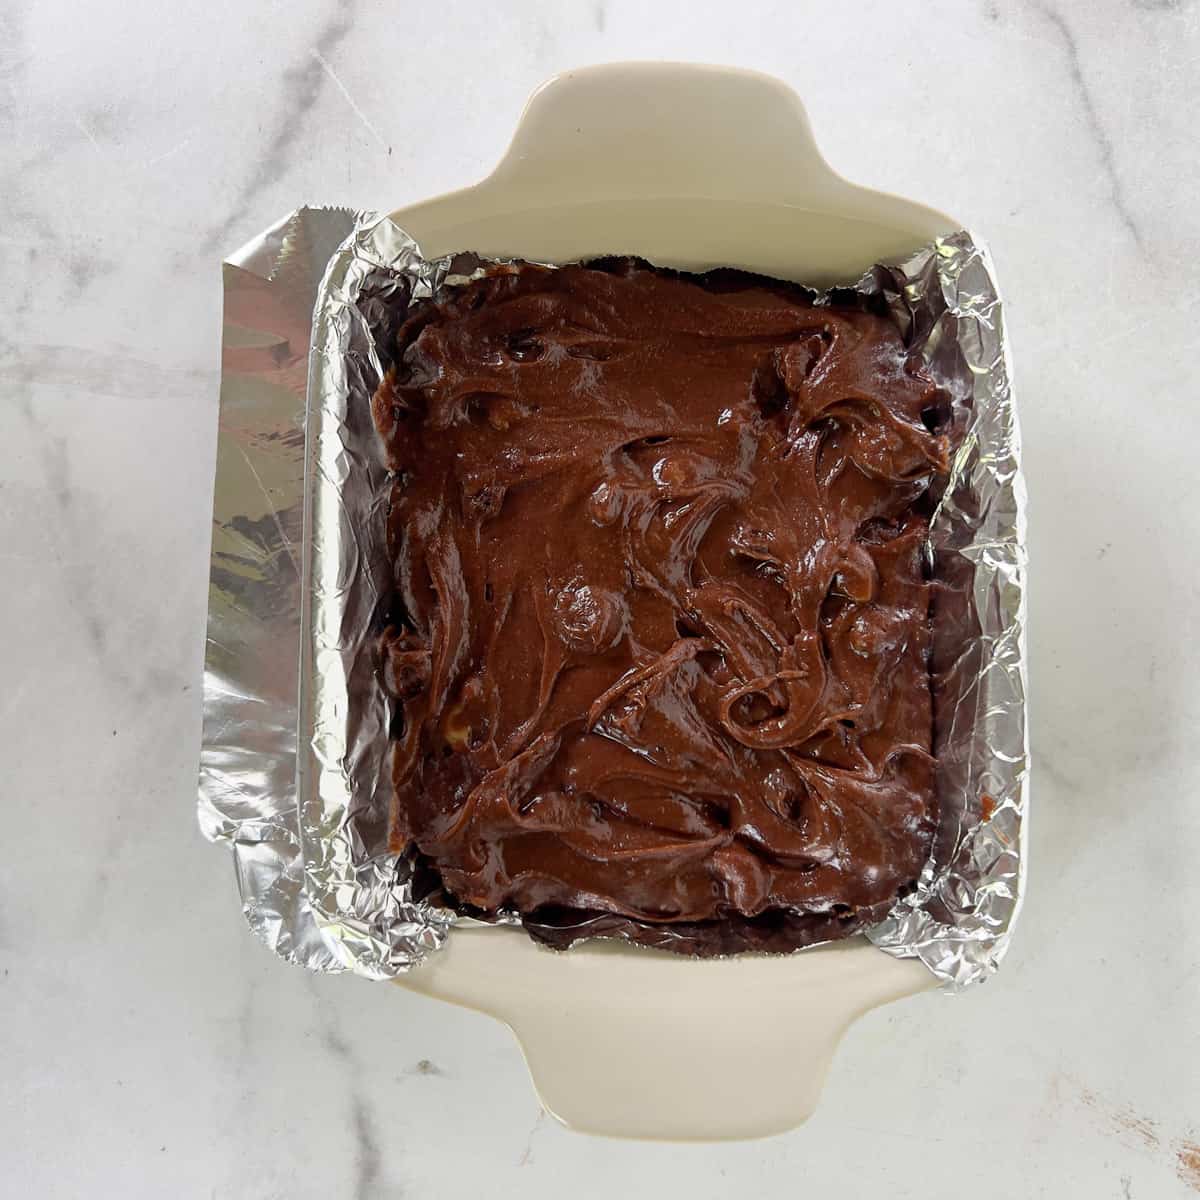 Brownie batter in small foil line baking dish.